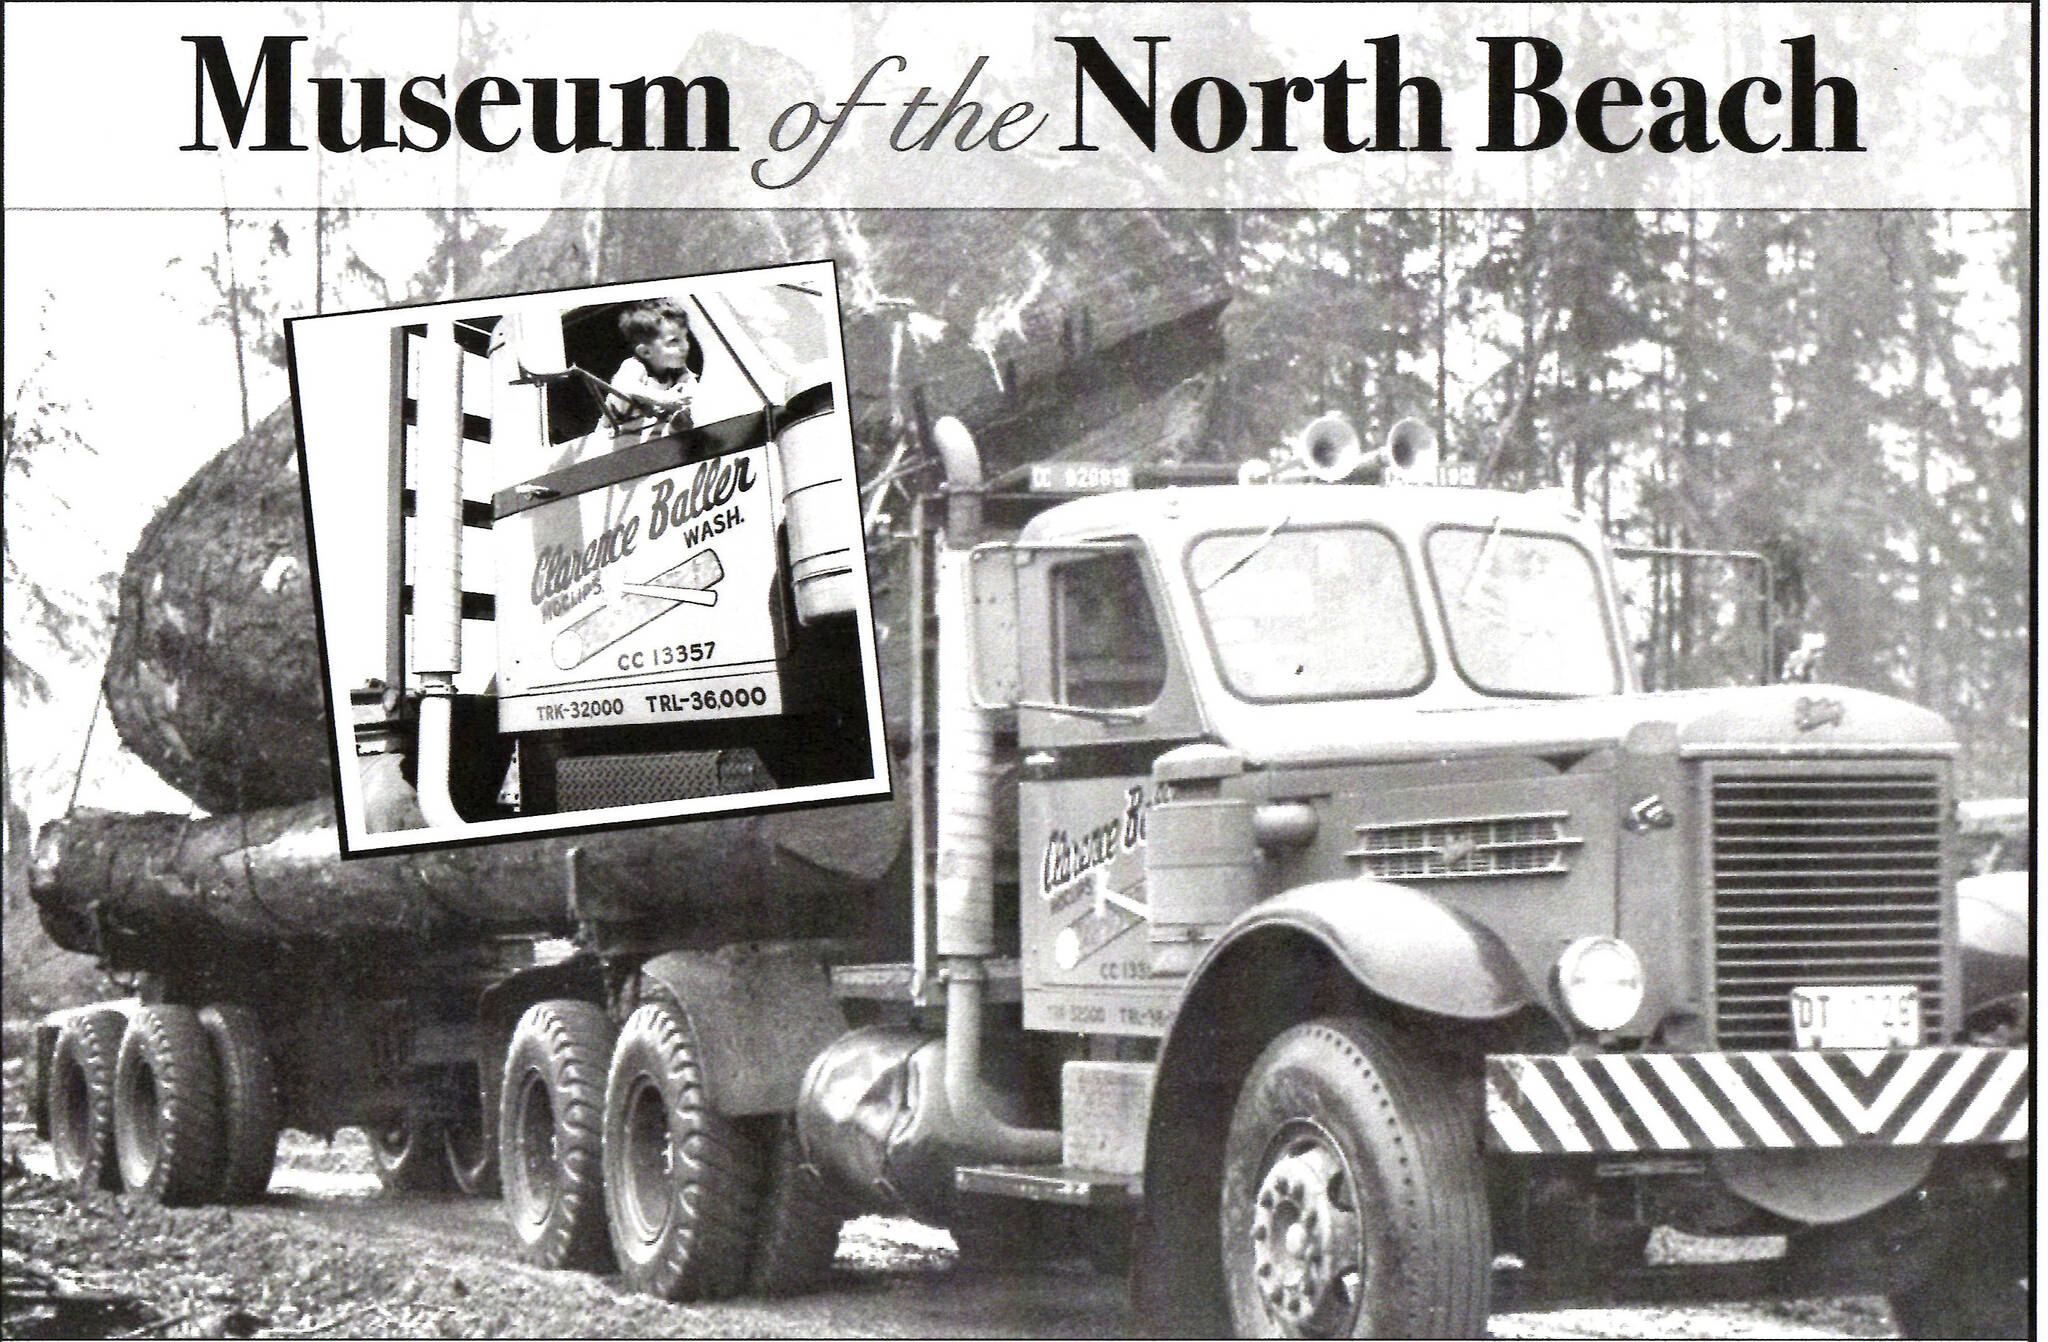 Musem of the North Beach 
2023 Historical Calendar produced by the Museum of the North Beach’s cover depicts a one-log load on Moclips resident Clarence Baller’s logging truck.